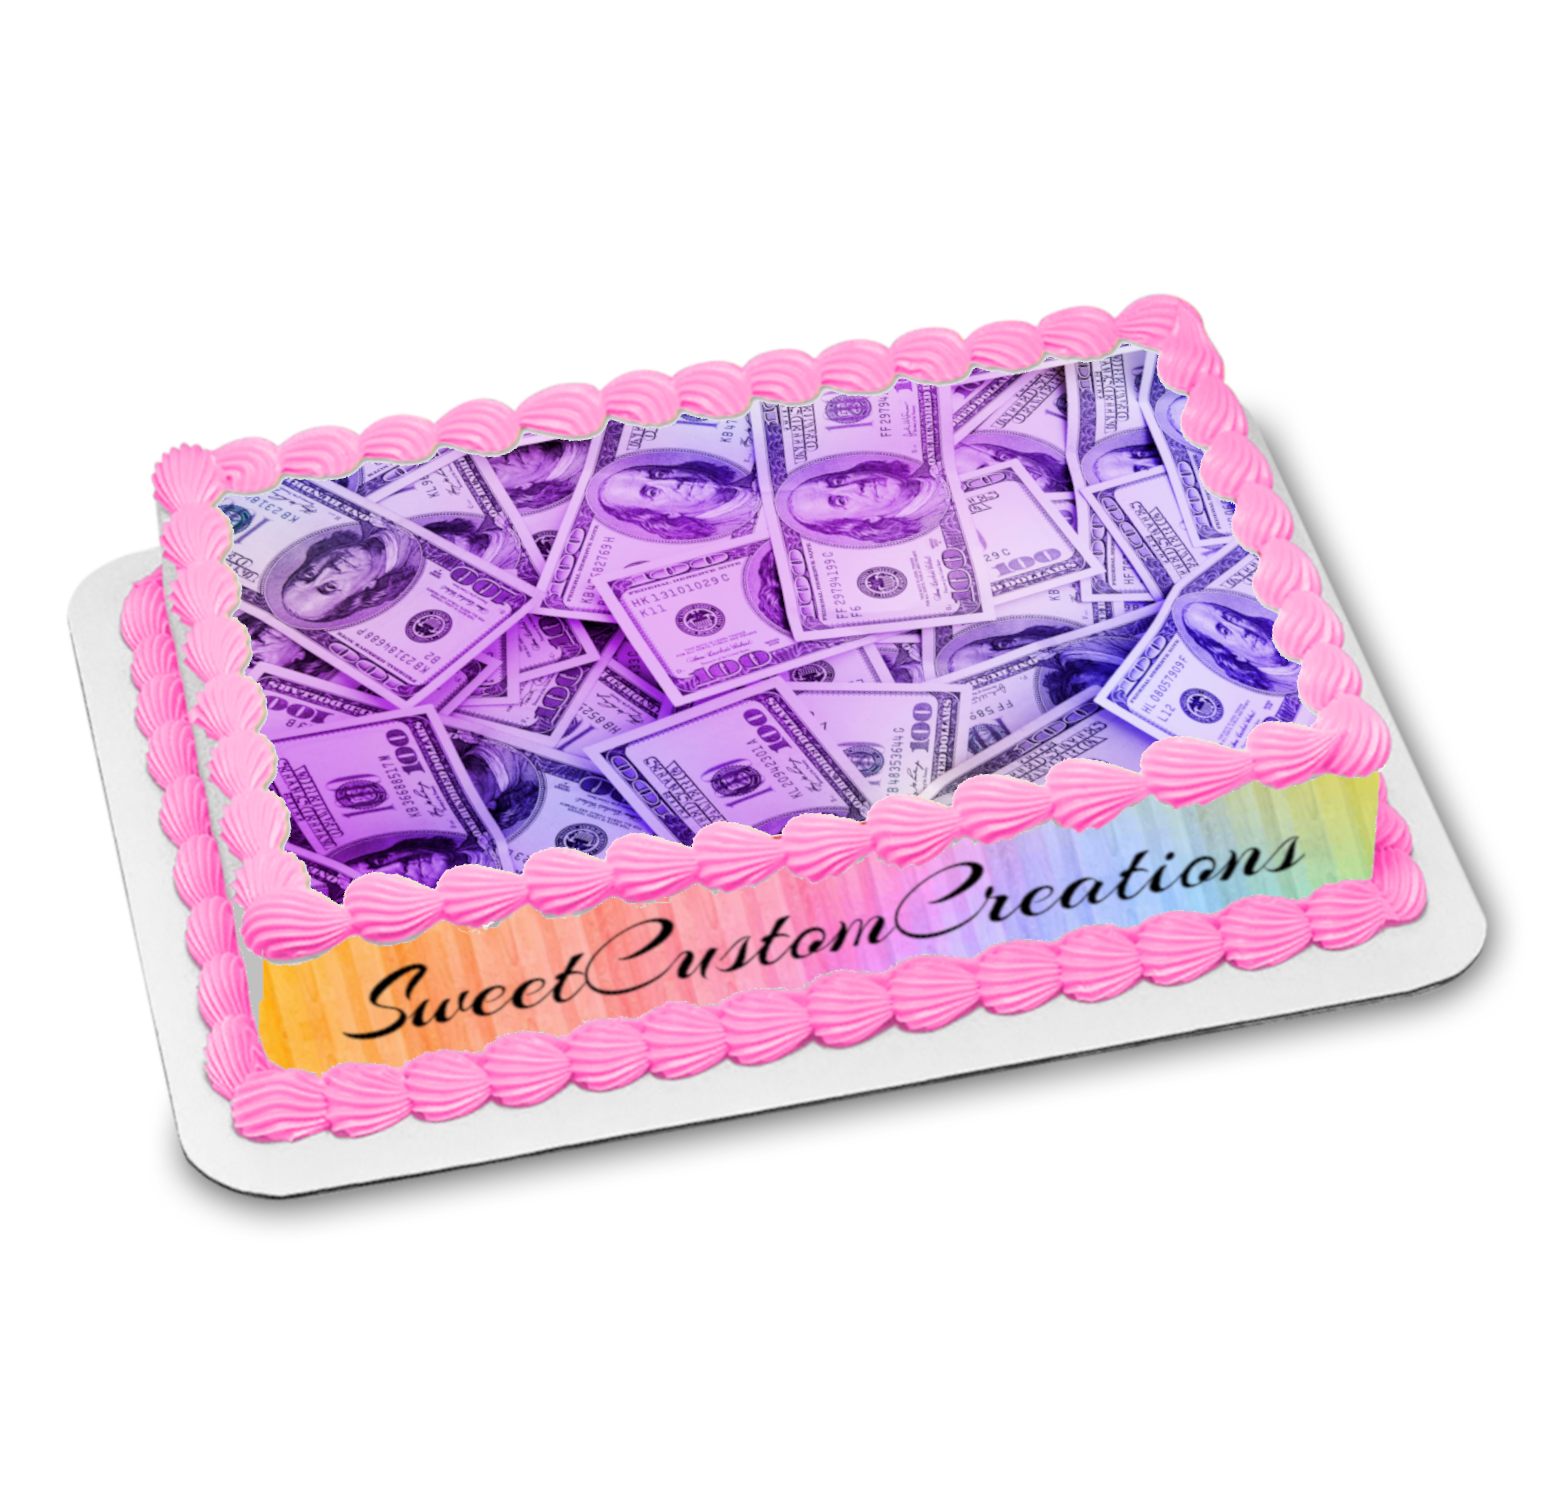 Products :: 12 precut 100 dollar bill edible money image wafer paper for  cake decorating or cupcake decorations. Precut edible paper fake money.